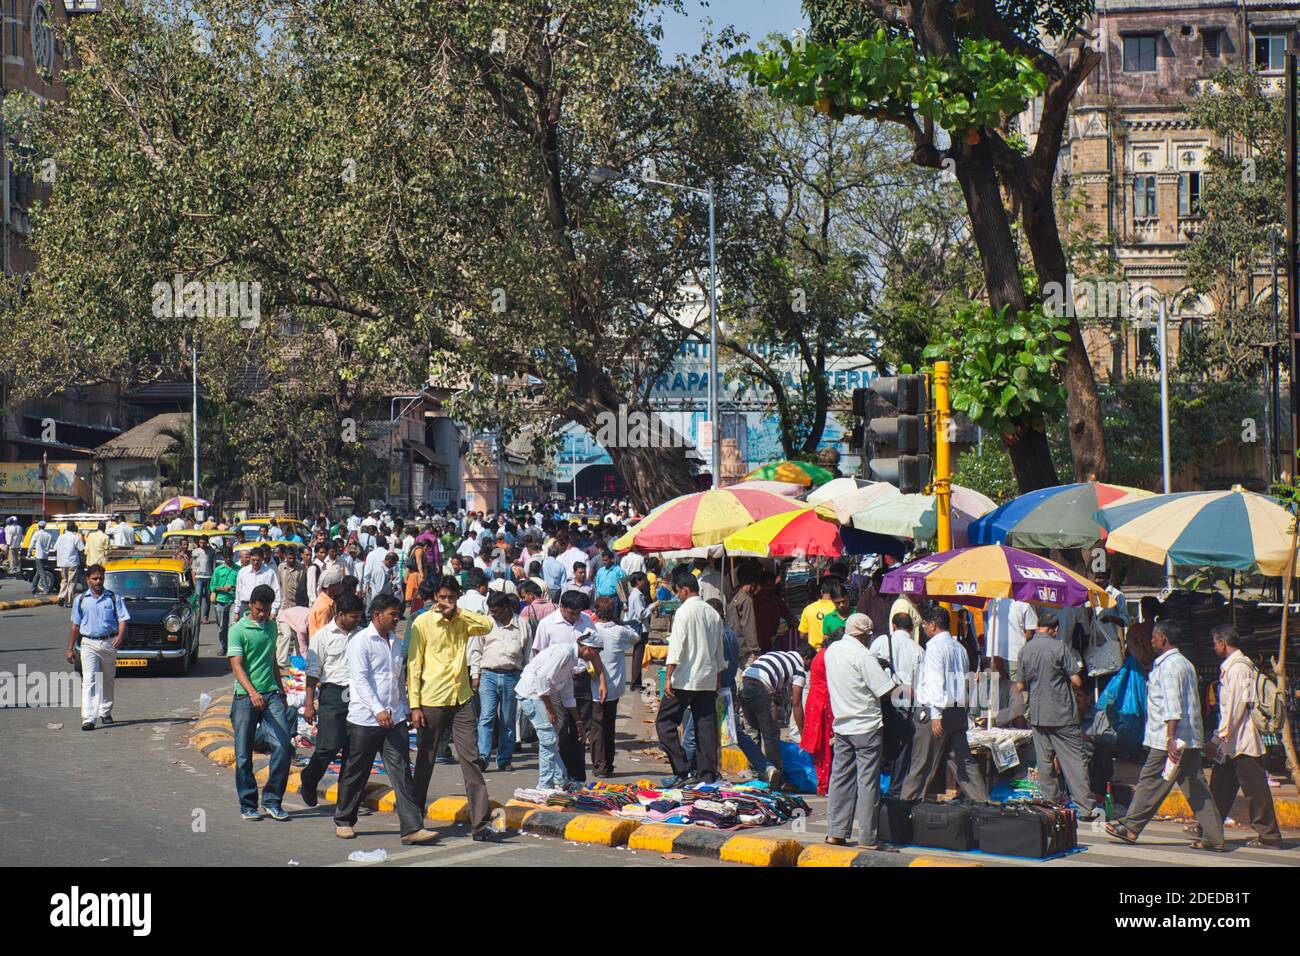 A colourful street scene in Mumbai India with market stalls and large crowds of people plus colourful sun brollies and trees Stock Photo